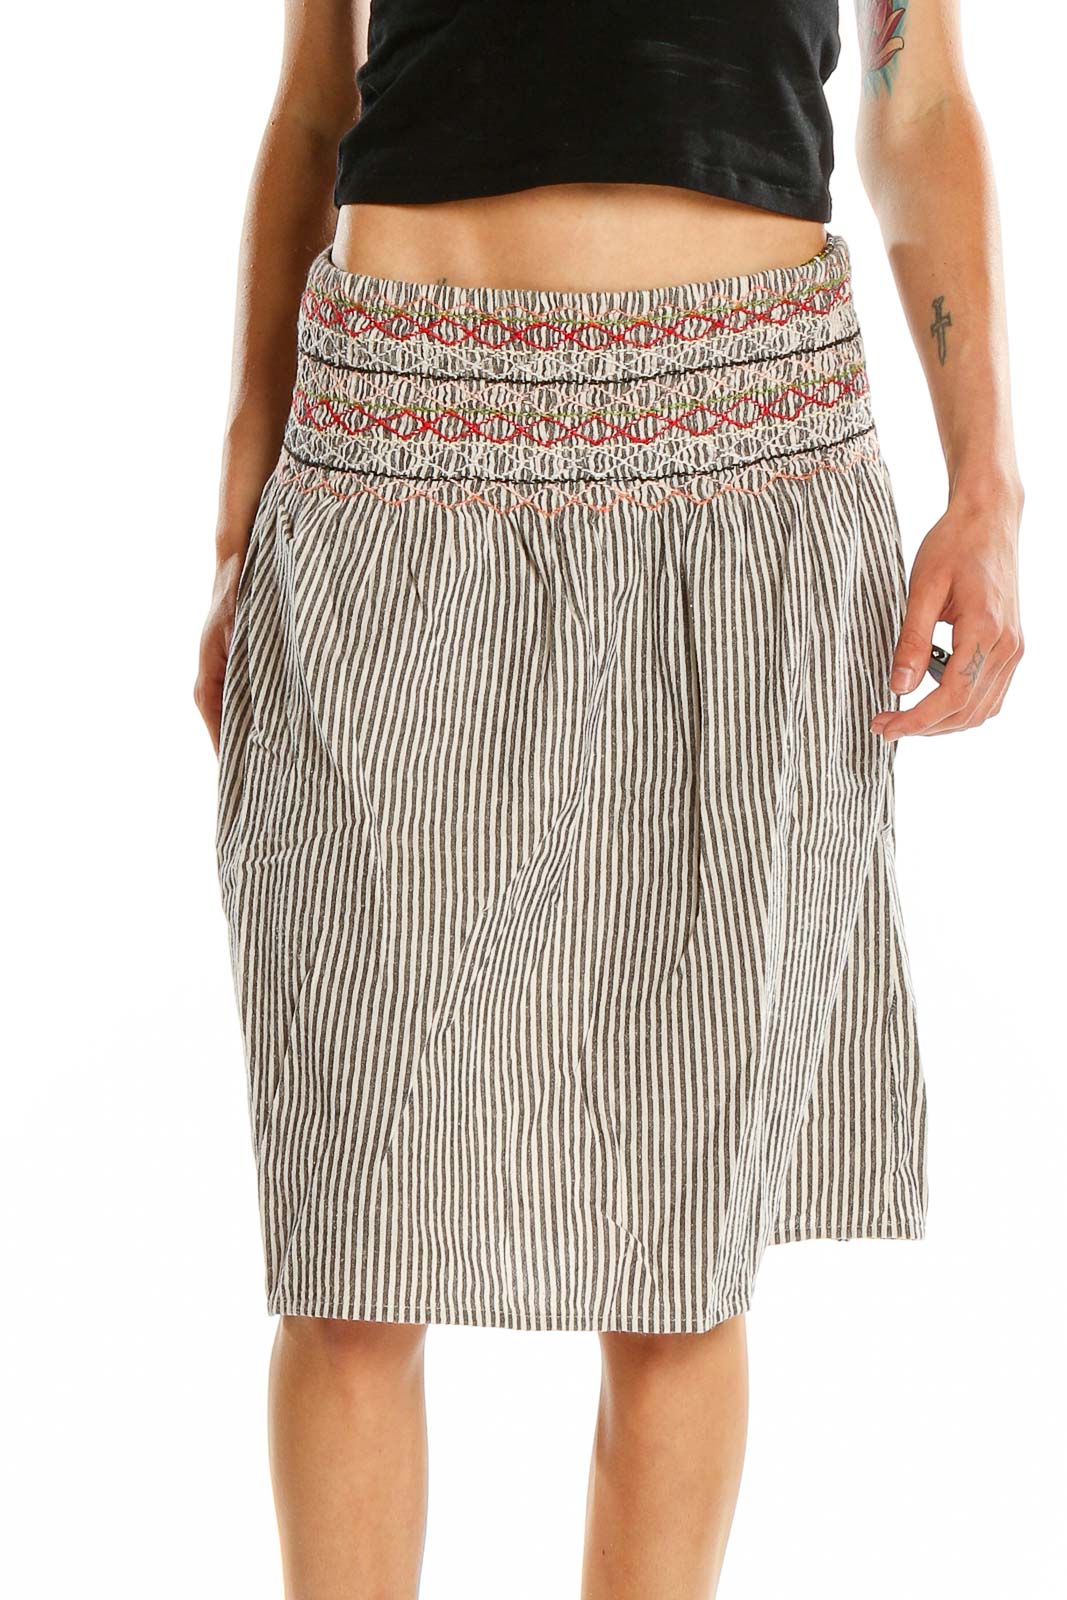 Gray Pinstripe Embroidered Waist Skirt Front